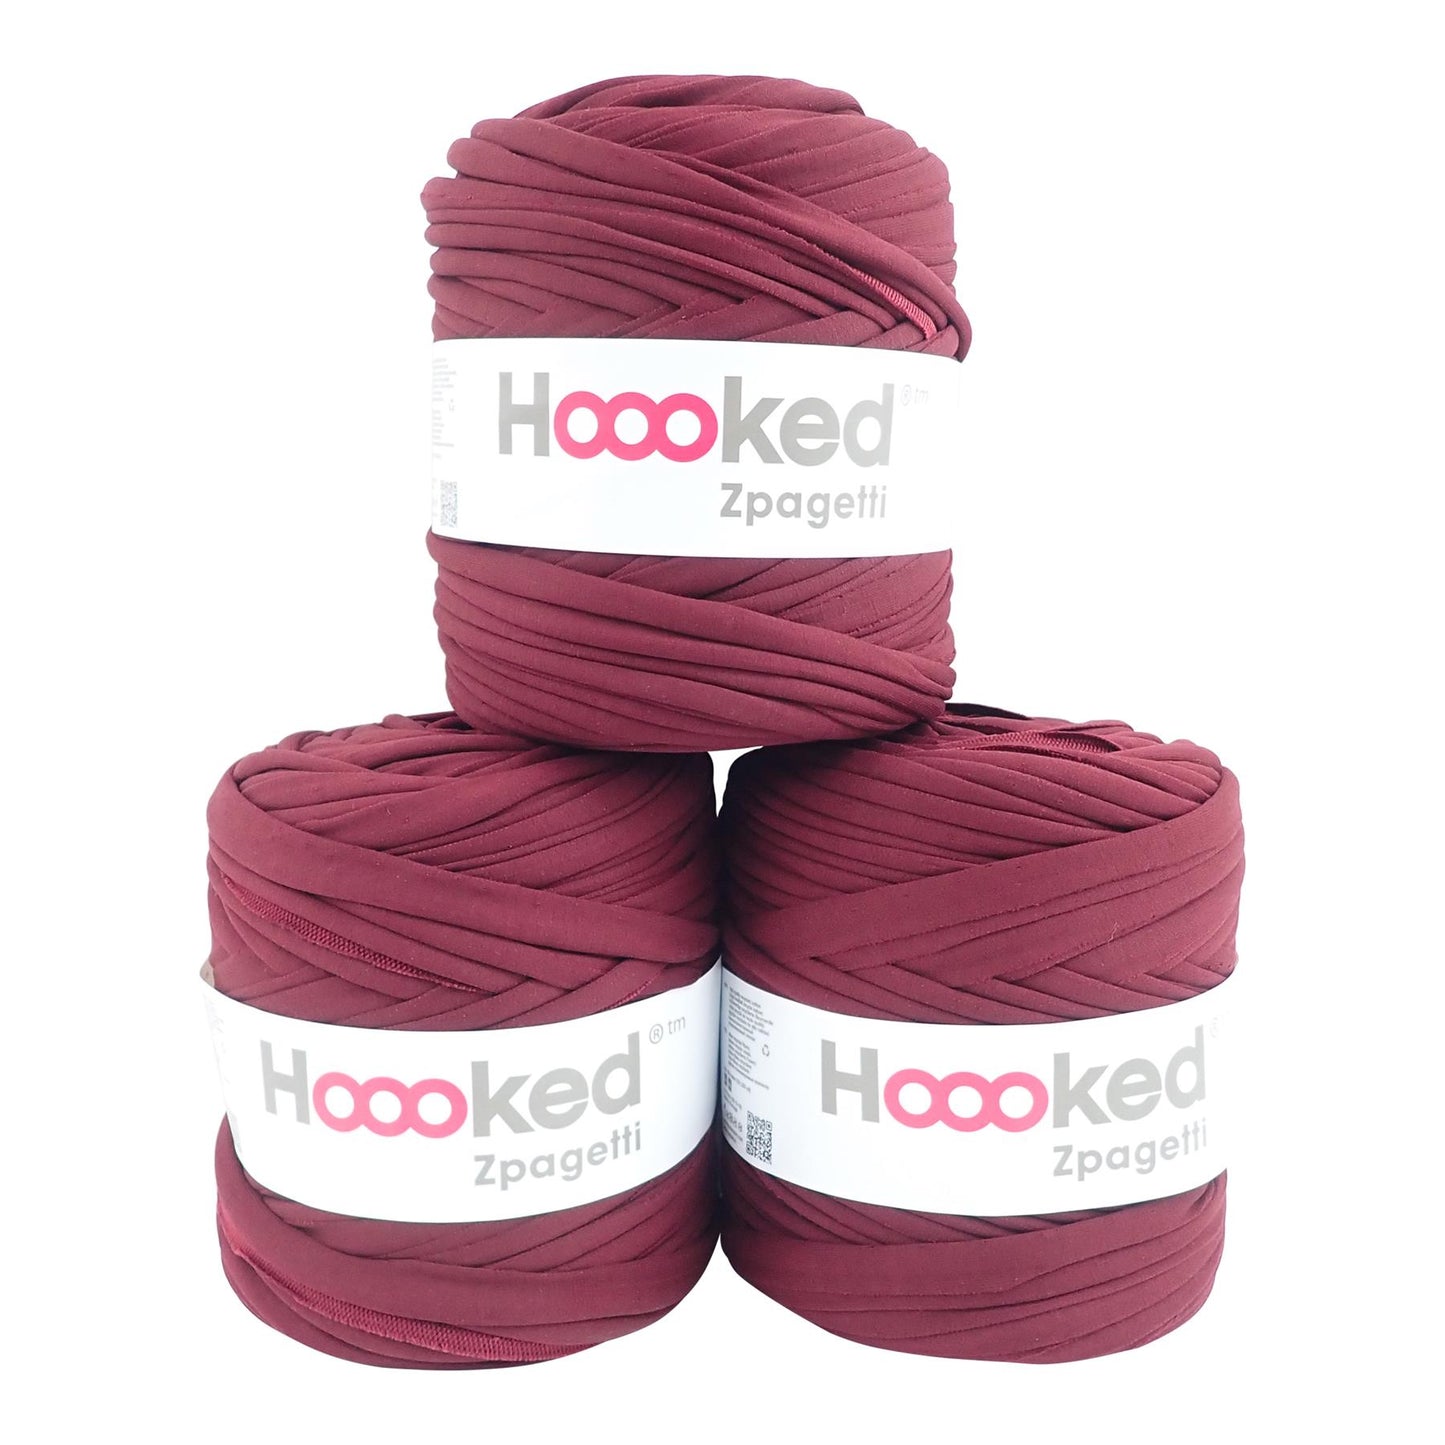 [Hoooked] Zpagetti Burgundy Red Cotton T-Shirt Yarn - 120M, 700g Pack of 3